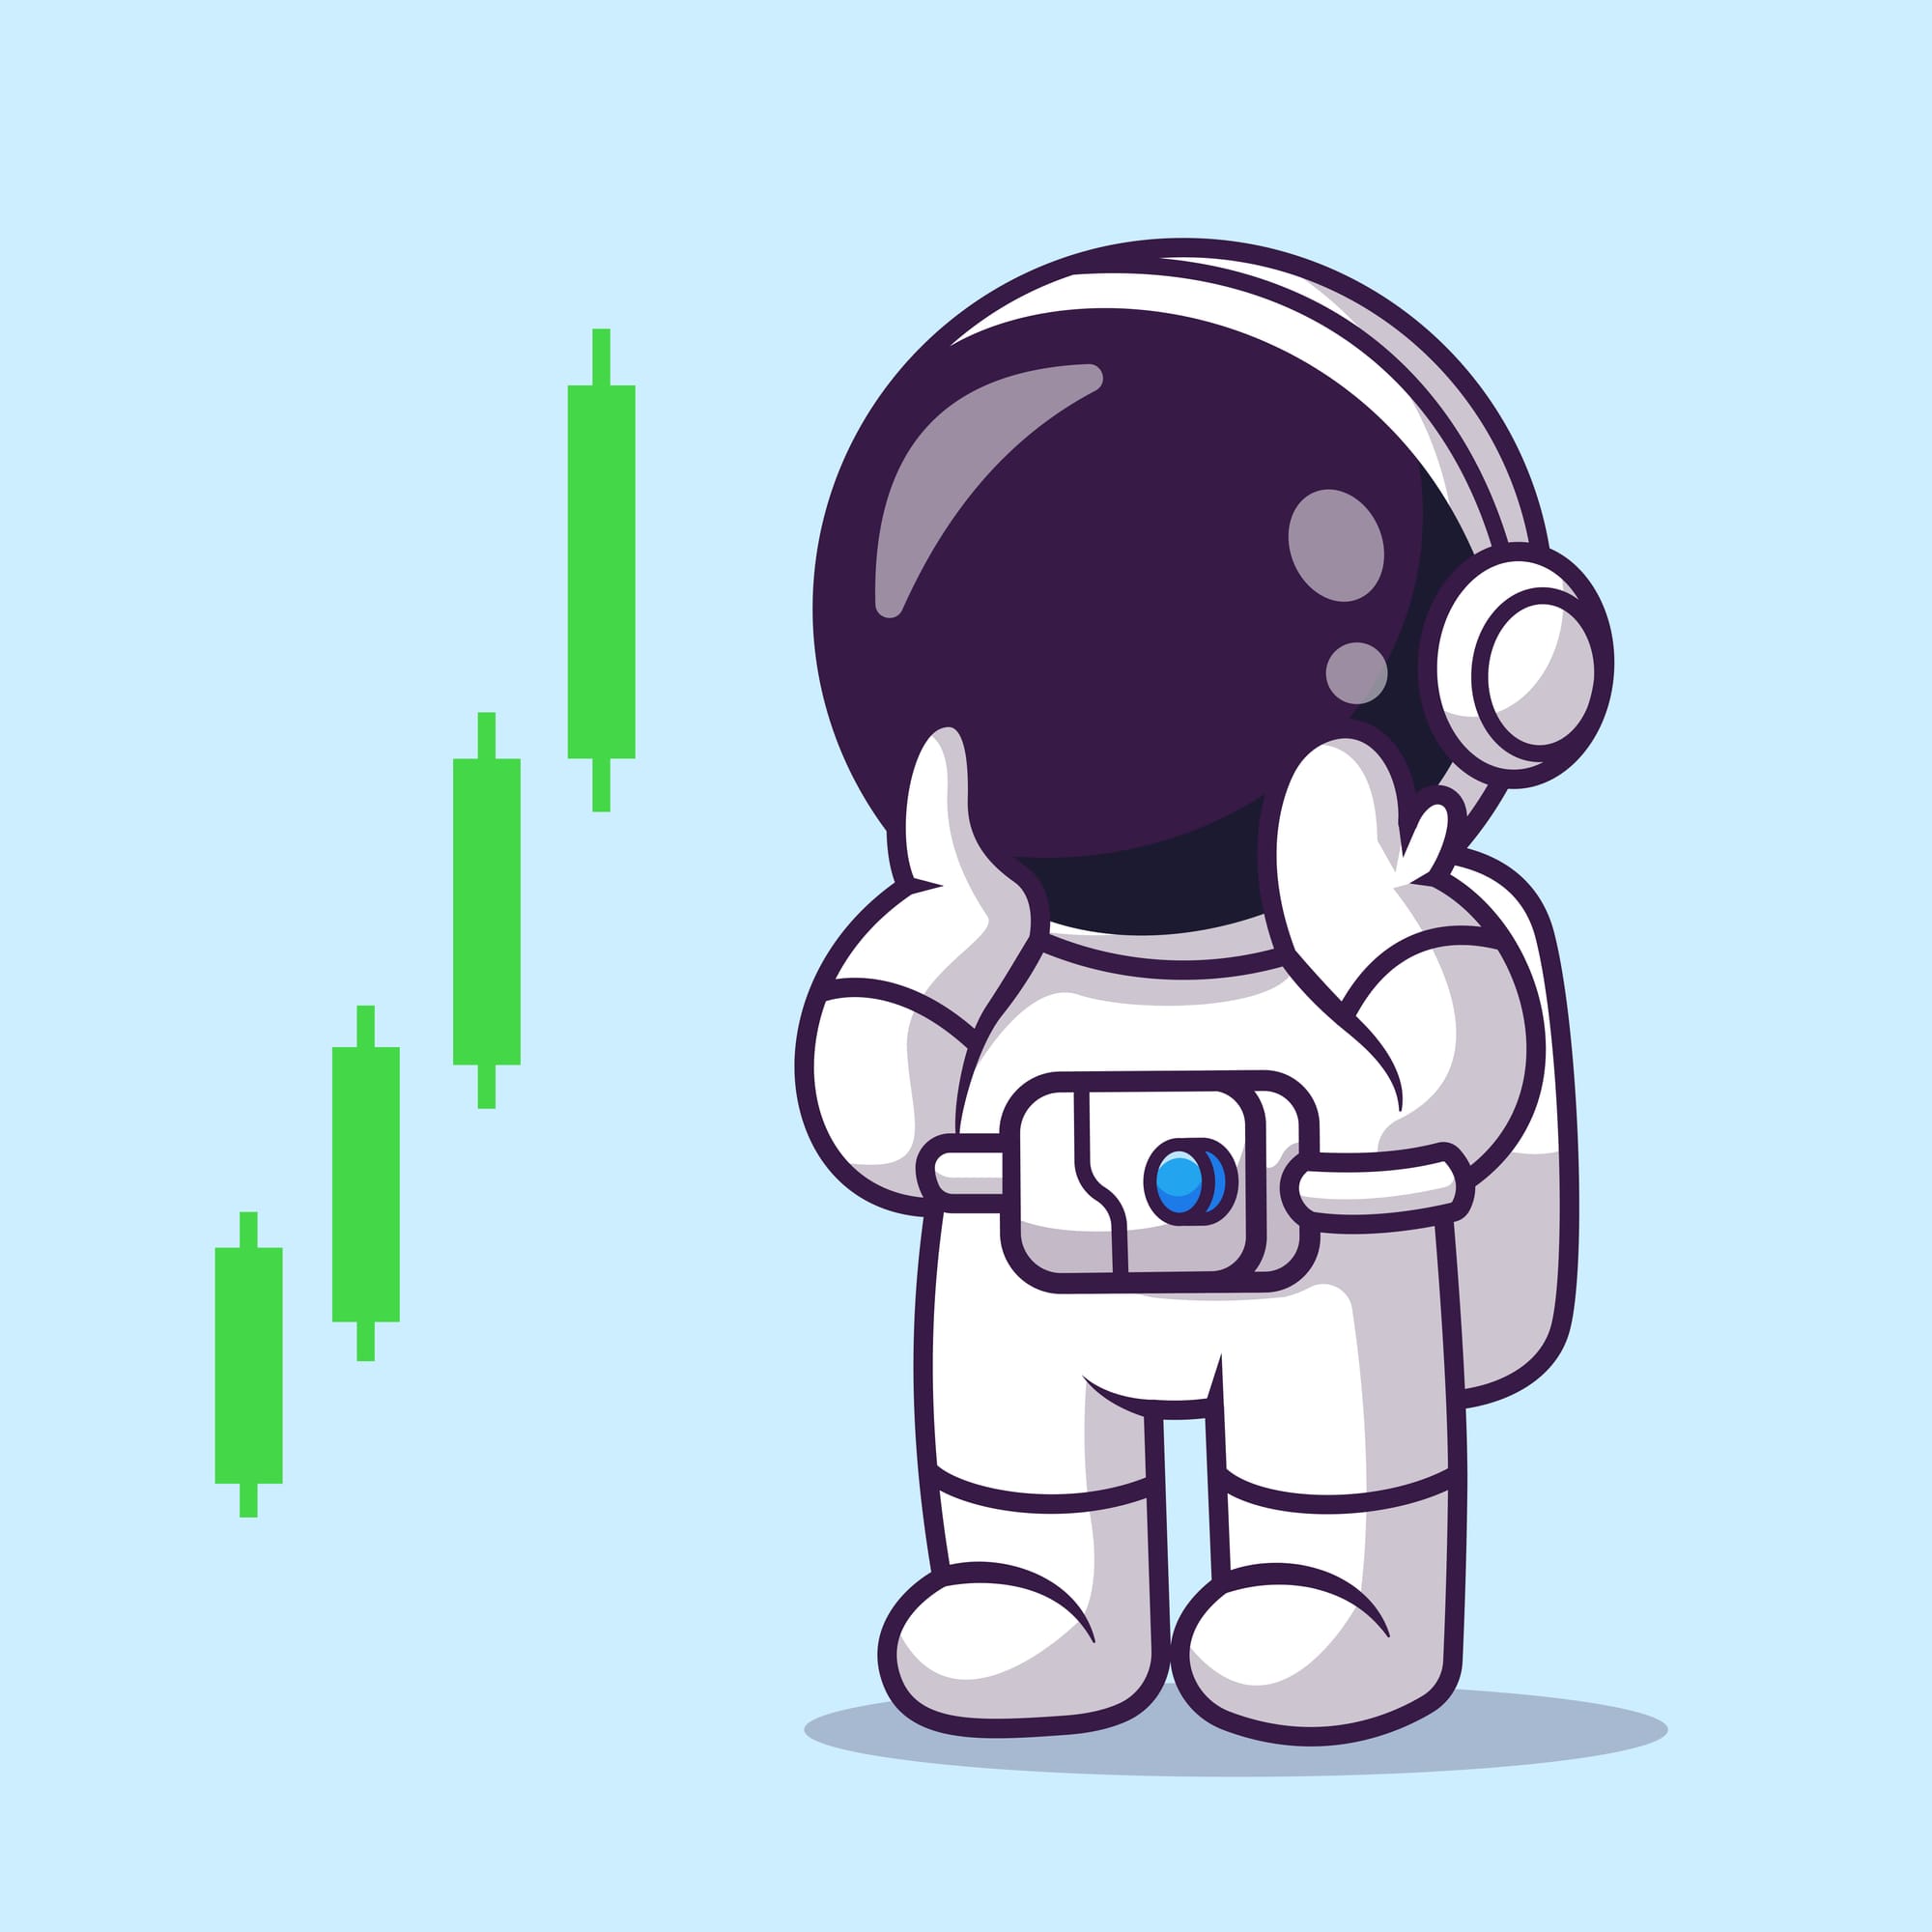 Cartoon astronaut gasps in astonishment at candlestick graph.